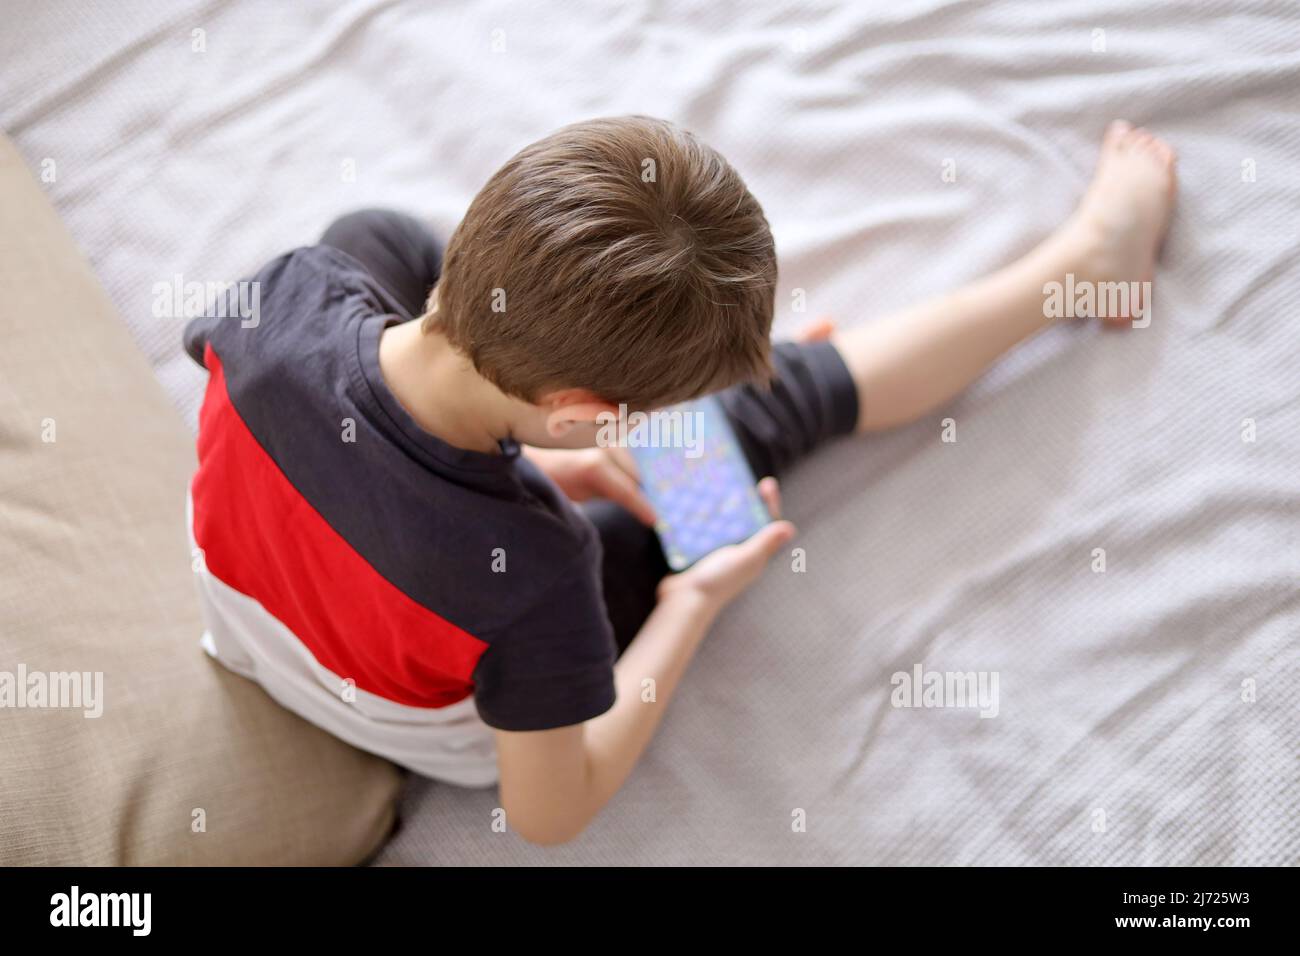 Little boy playing mobile game on smartphone sitting on a sofa, top view. Child leisure at home, video gaming addiction Stock Photo